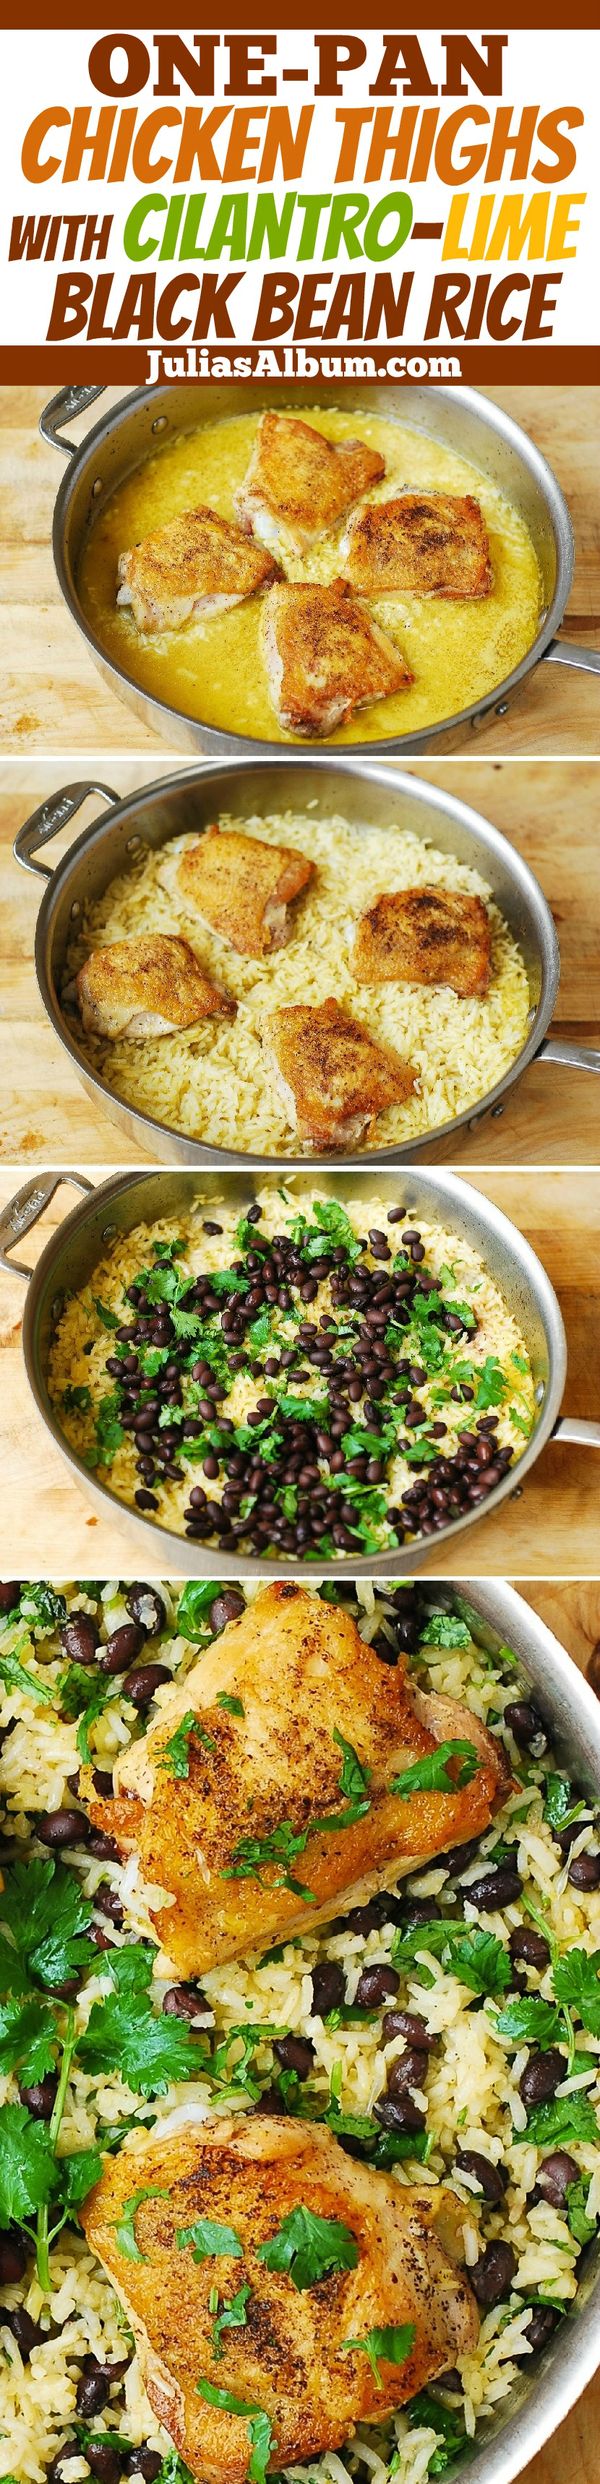 One-Pot Chicken Thighs with Cilantro-Lime Black Bean Rice